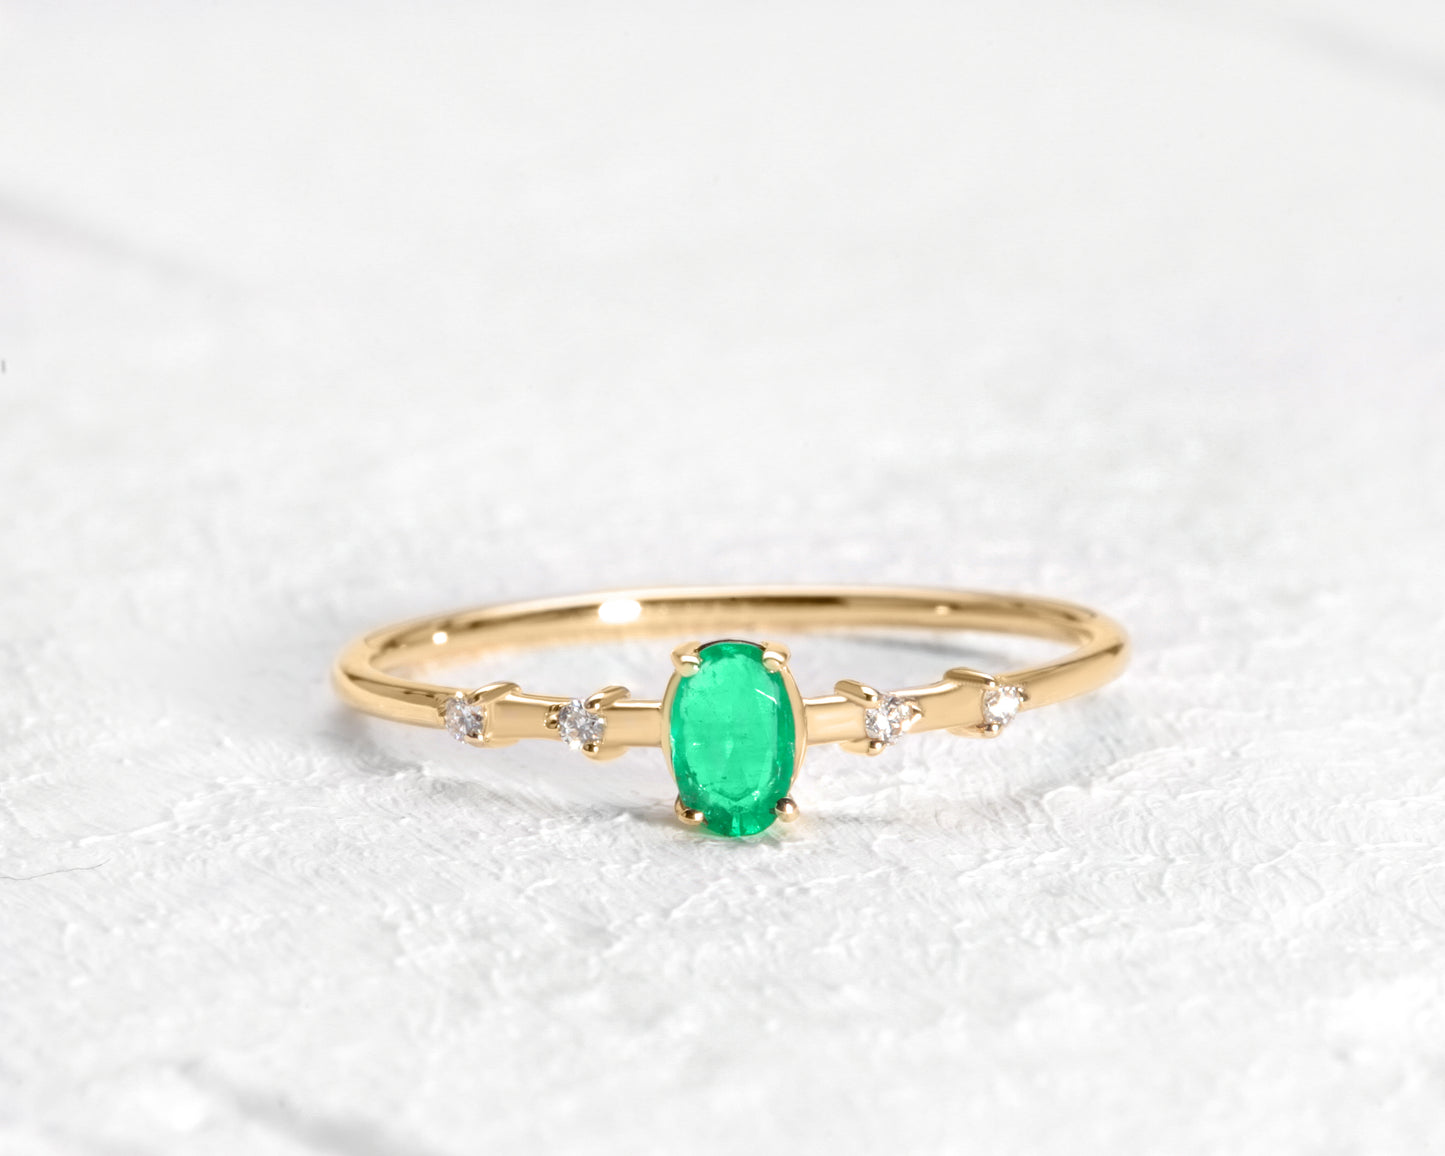 Dainty Ring, Oval cut Emerald with Sprinkled Diamonds, 14K Gold